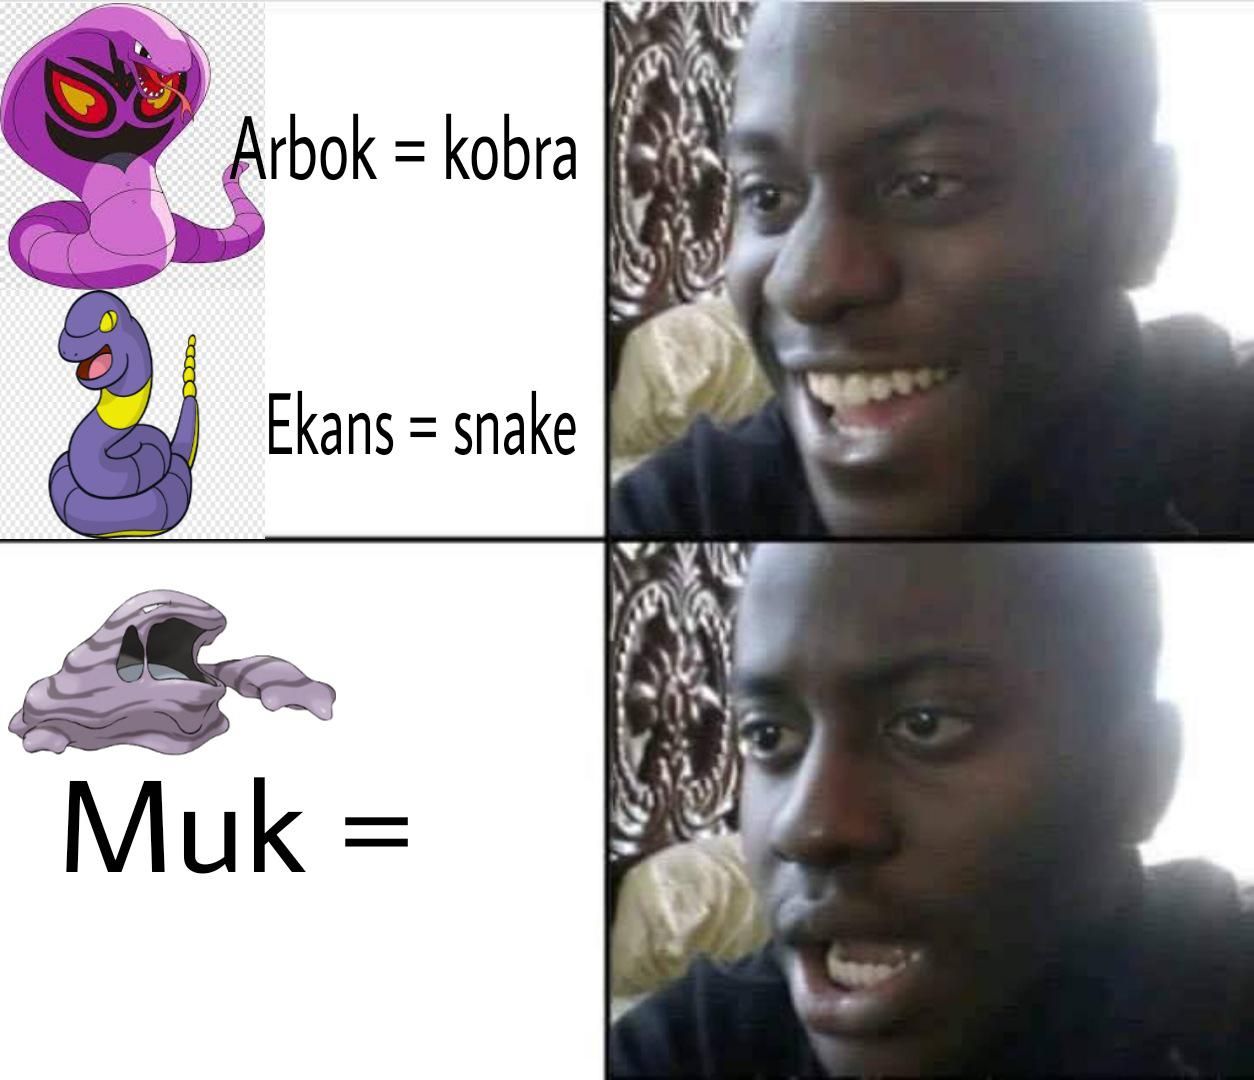 I got scammed with a fake png with erbok and ekans